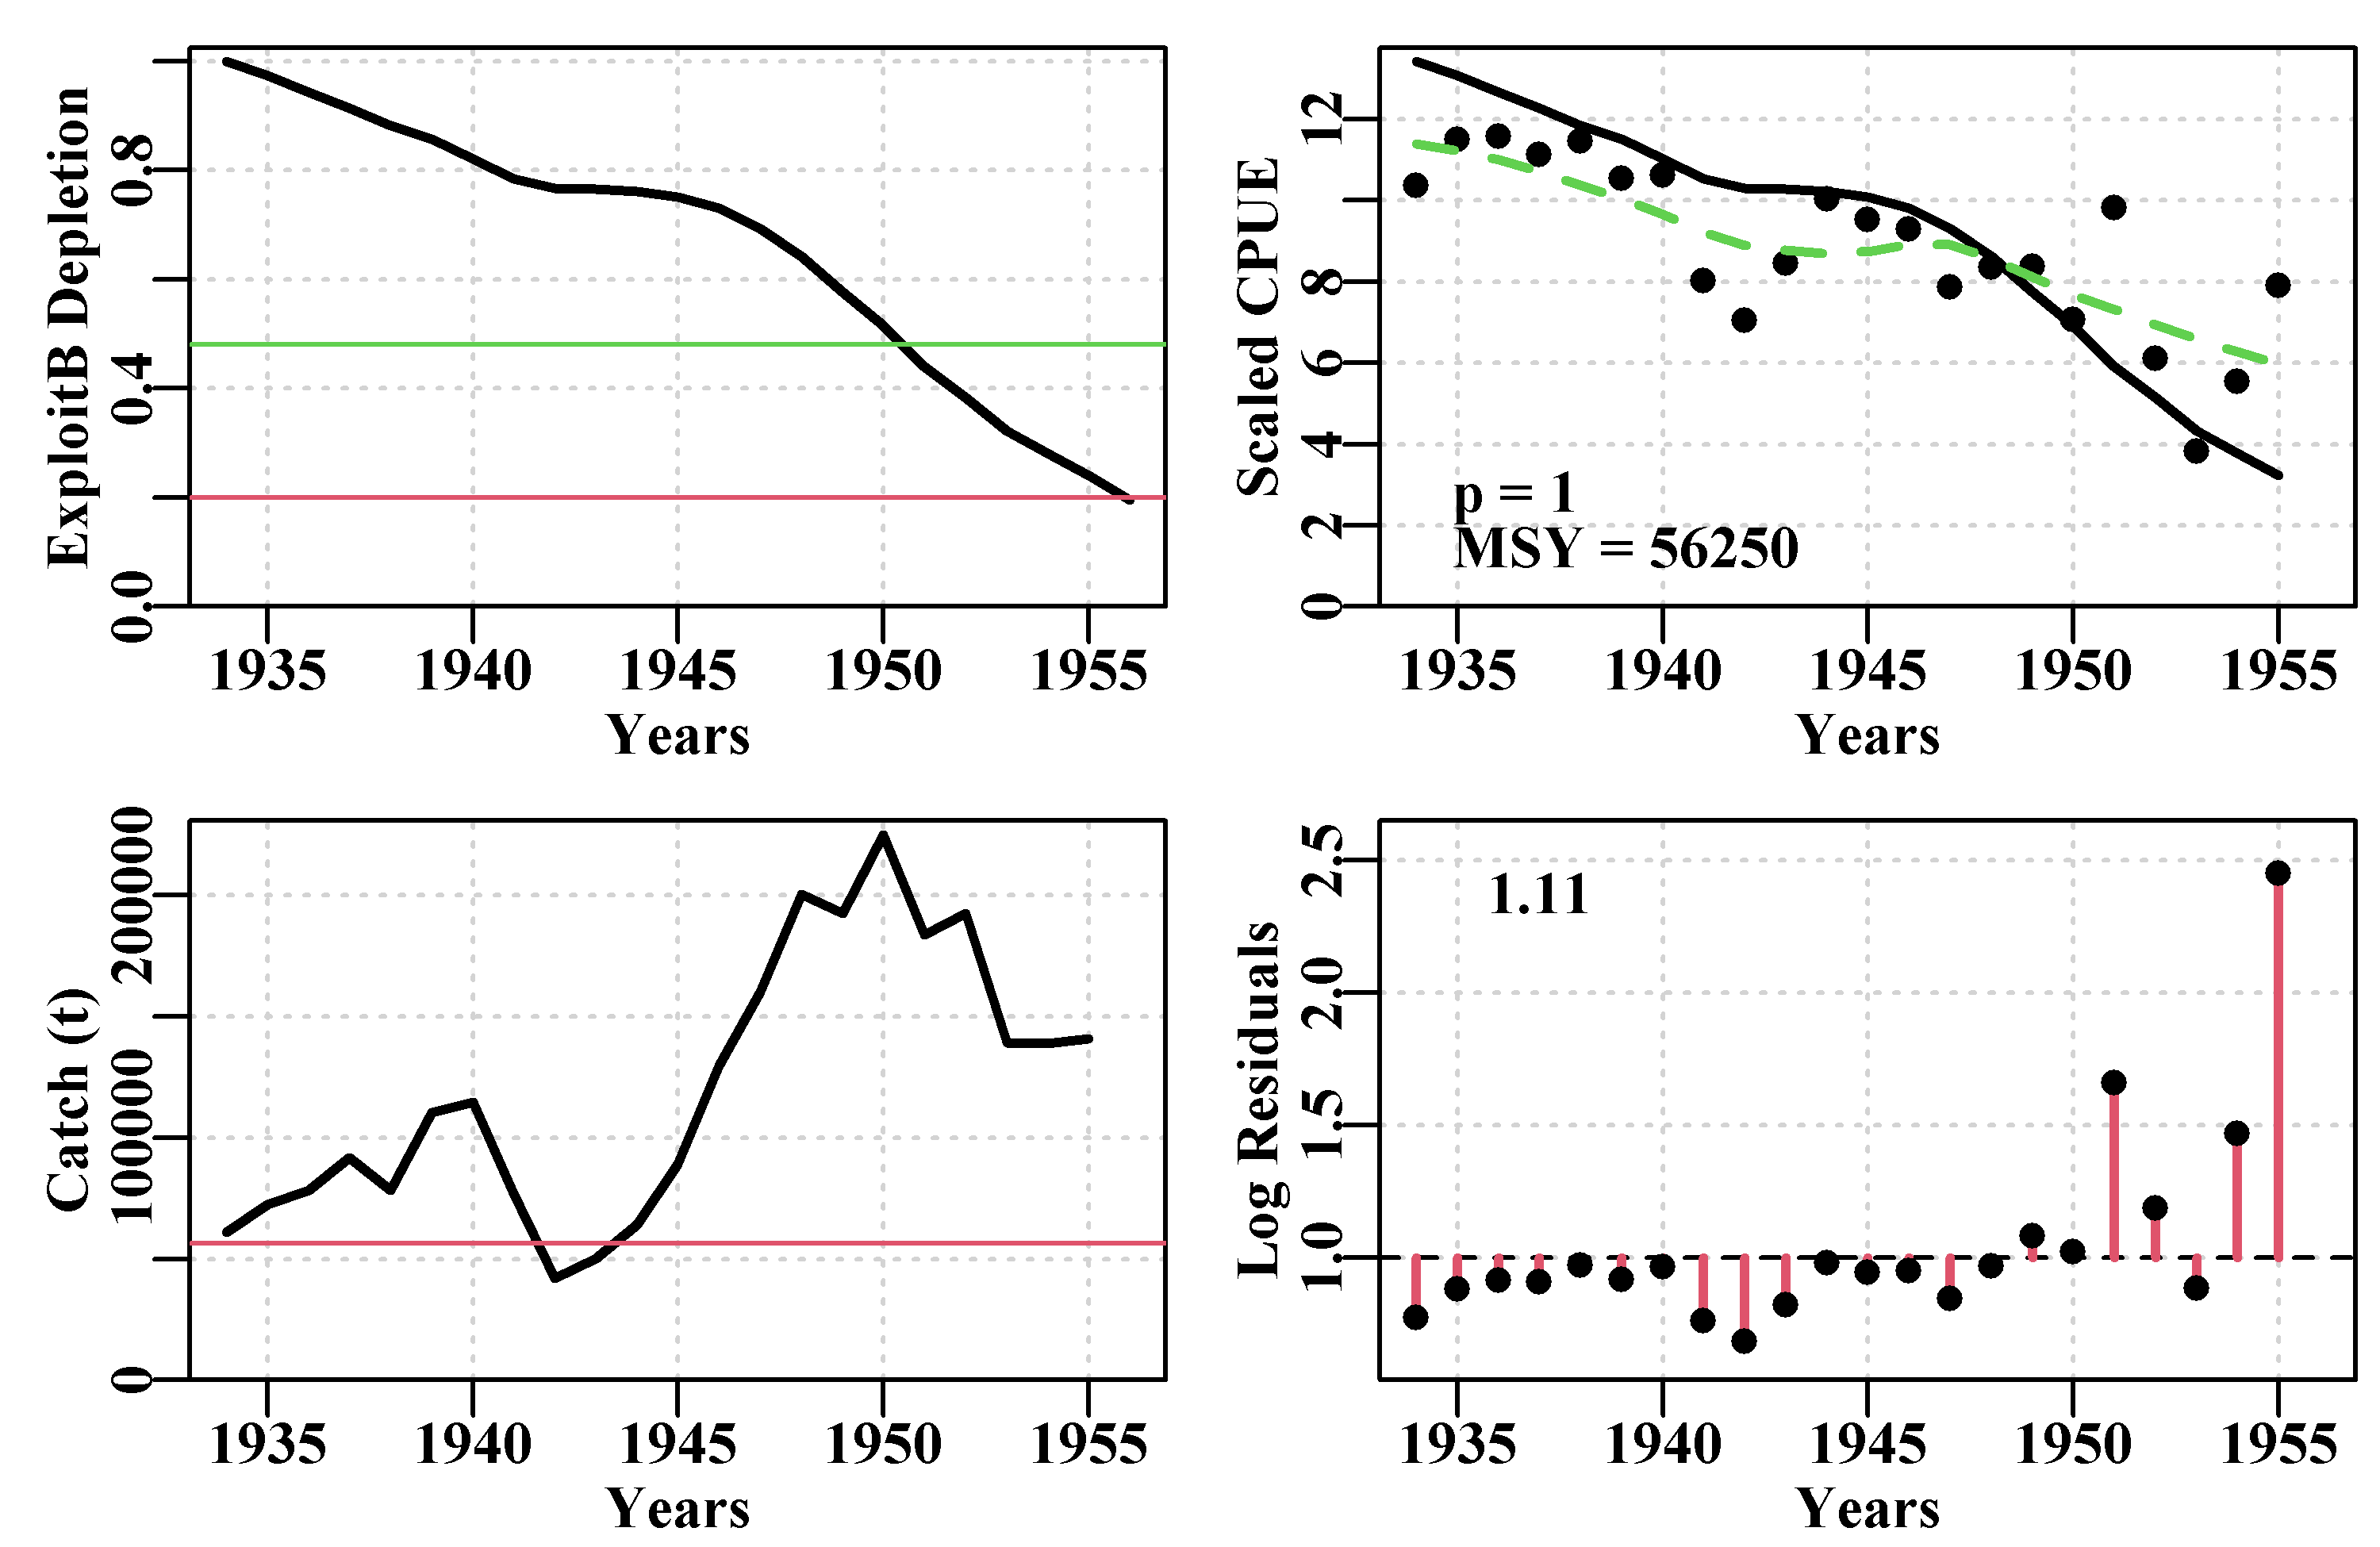 The tentative fit of a surplus production model to the schaef data-set using the initial parameter values. The dashed green line in the CPUE plot is a simple loess fit, while the solid line is that implied by the guessed input parameters. The horizontal red line in the catch plot is the predicted MSY. The number in the residual plot is the root mean square error of the log-normal residuals.